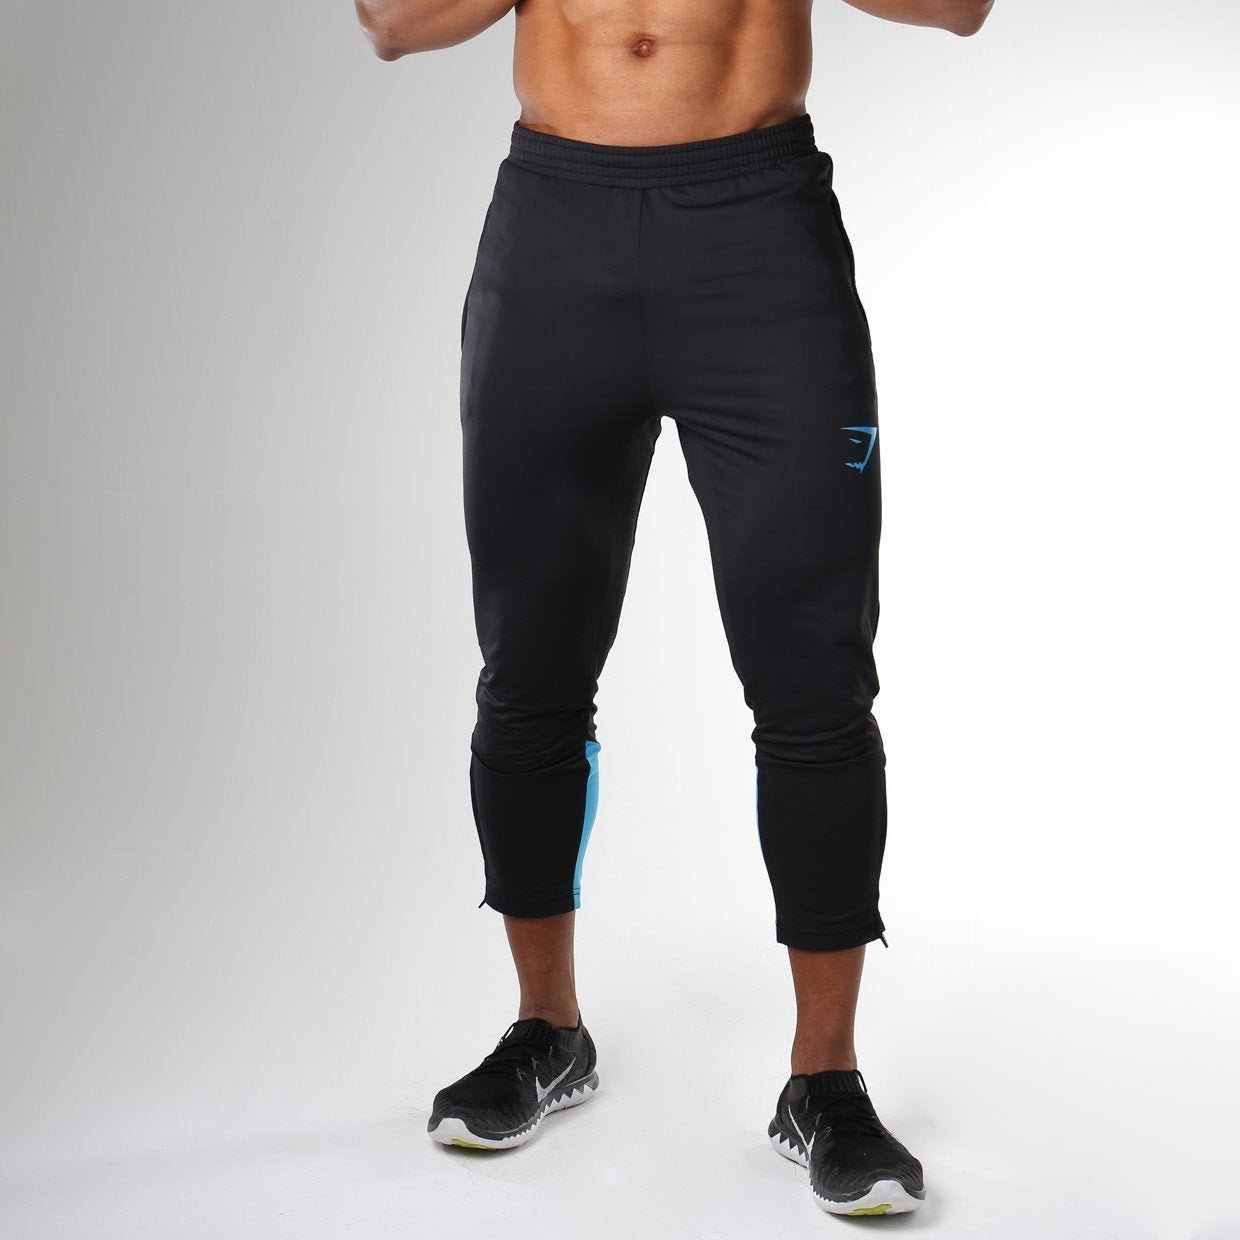 Reactive 3/4 Training Pant in Black/Blue - view 3